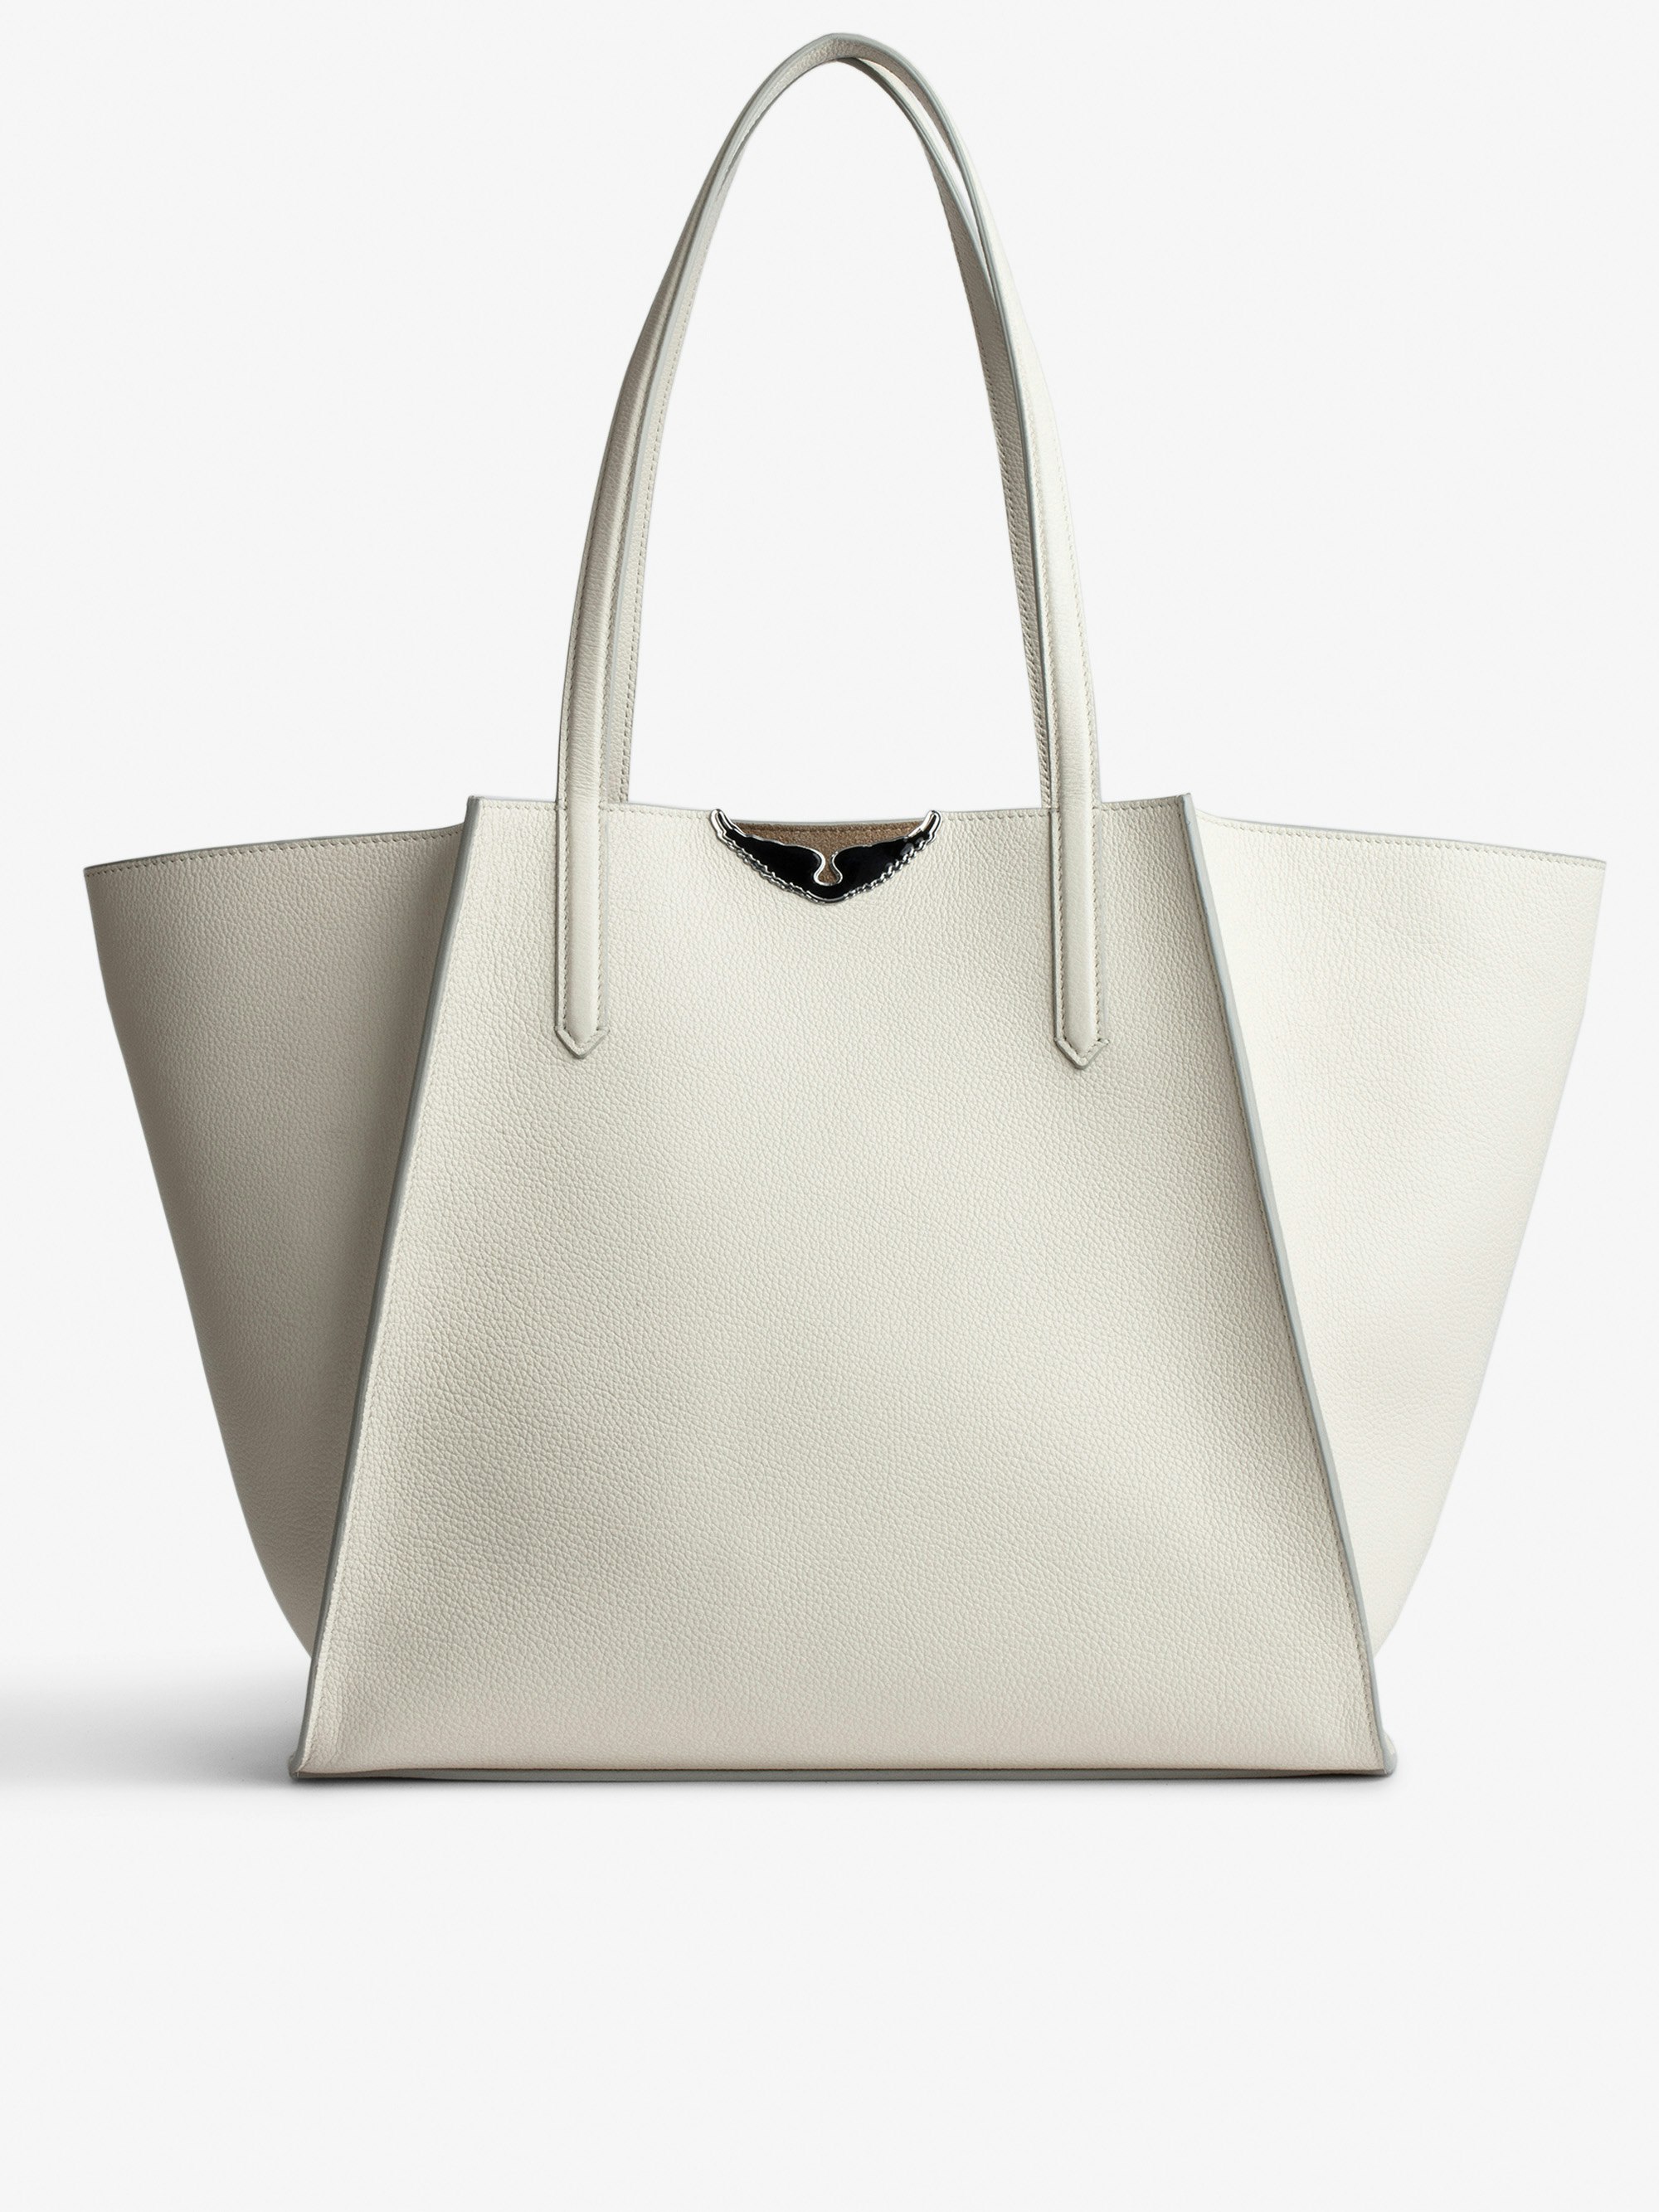 Le Borderline Bag - Women's tote bag in ecru grained leather and beige suede with black lacquered wings